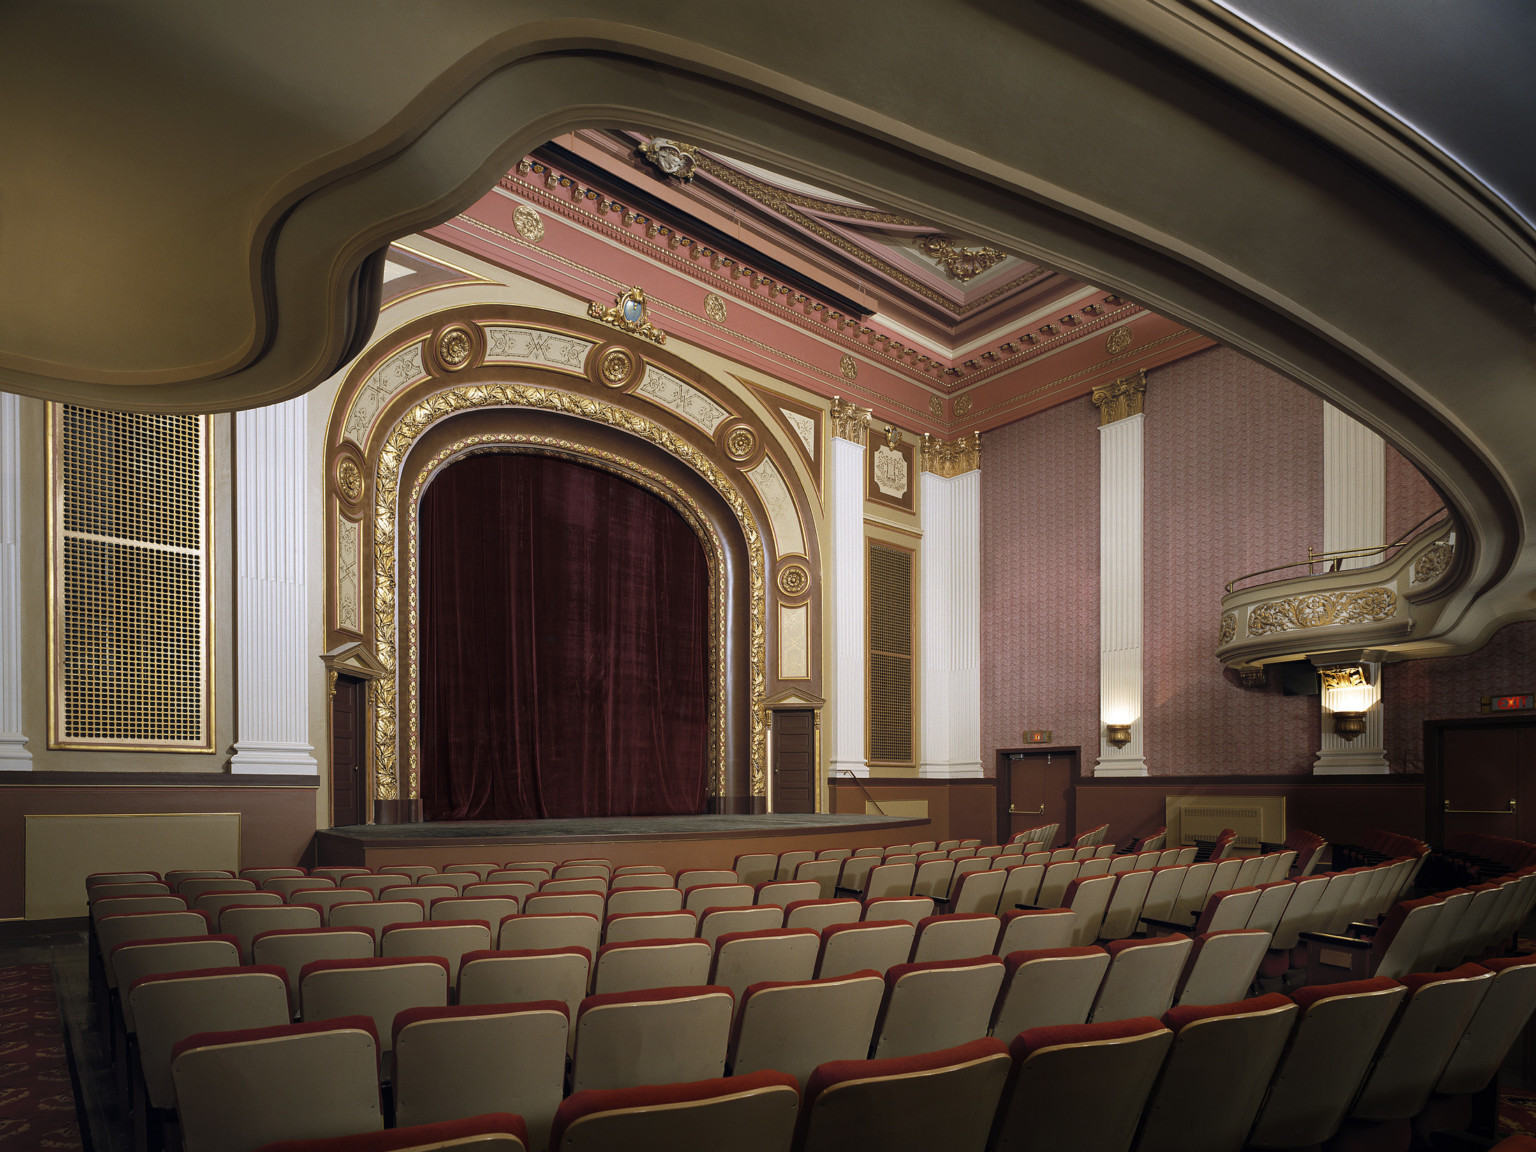 Appell Center interior looking to stage, view of base of curving balcony, elaborate gold and white moulding on proscenium